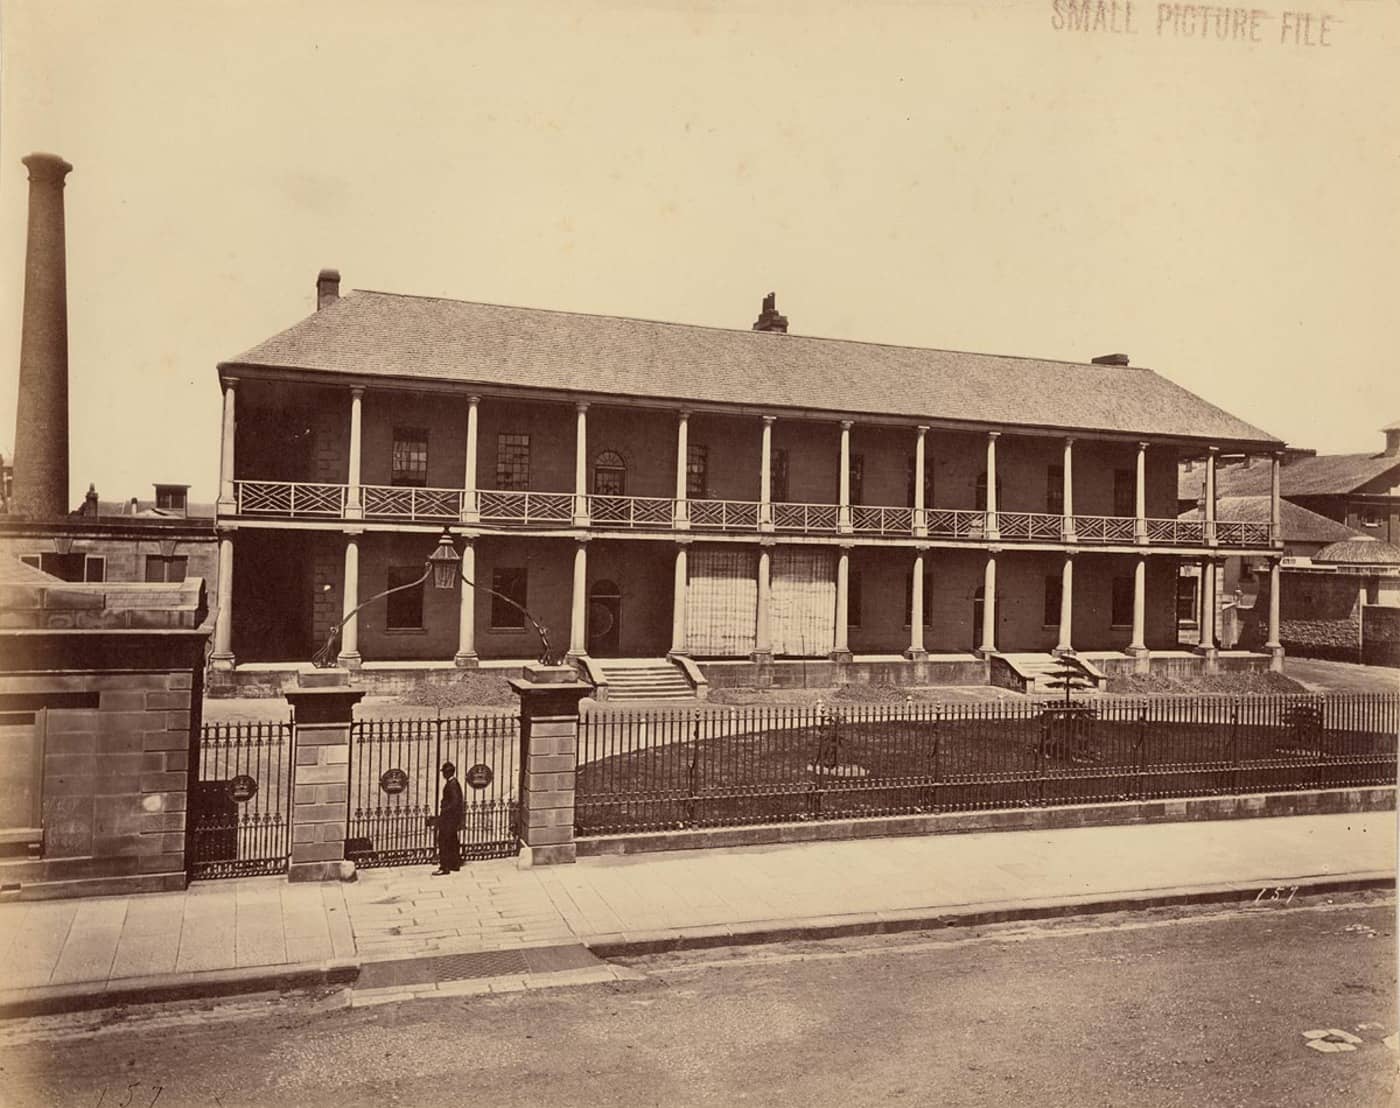 Sydney branch, Royal Mint Macquarie Street  attributed to Charles Pickering